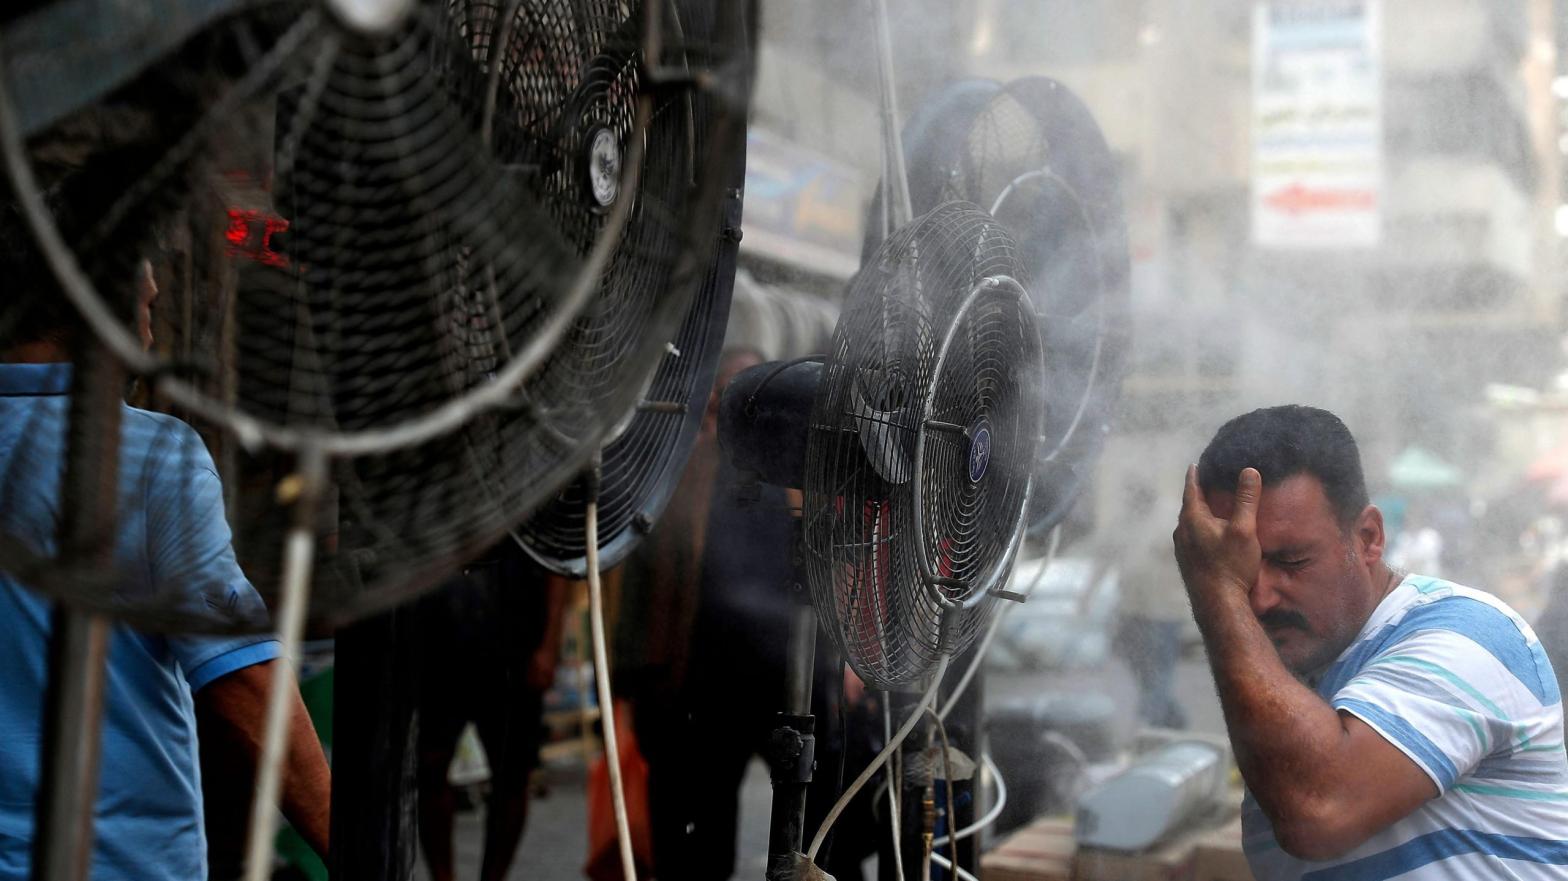 A man stands by fans spraying air mixed with water vapour deployed by donors to cool down pedestrians along a street in Iraq's capital Baghdad on June 30, 2021 amidst a severe heat wave. (Photo: Ahmad Al-Rubaye/AFP, Getty Images)